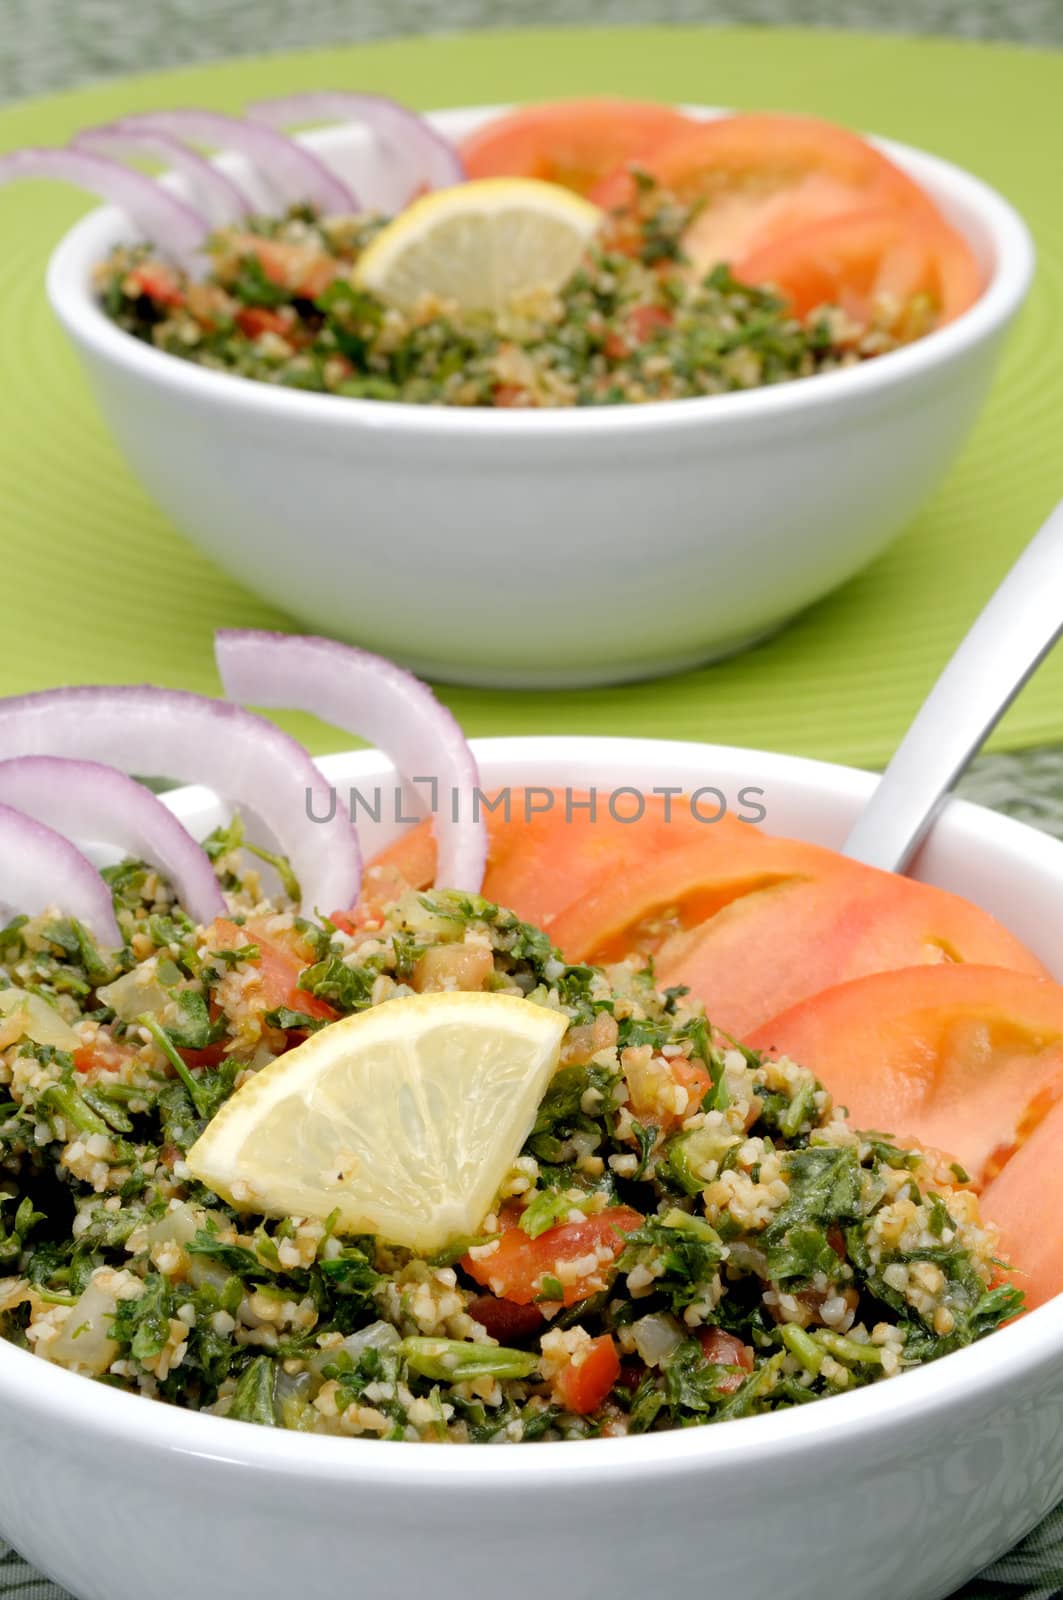 Tabbouleh with tomato and onion slices and lemon in white bowls